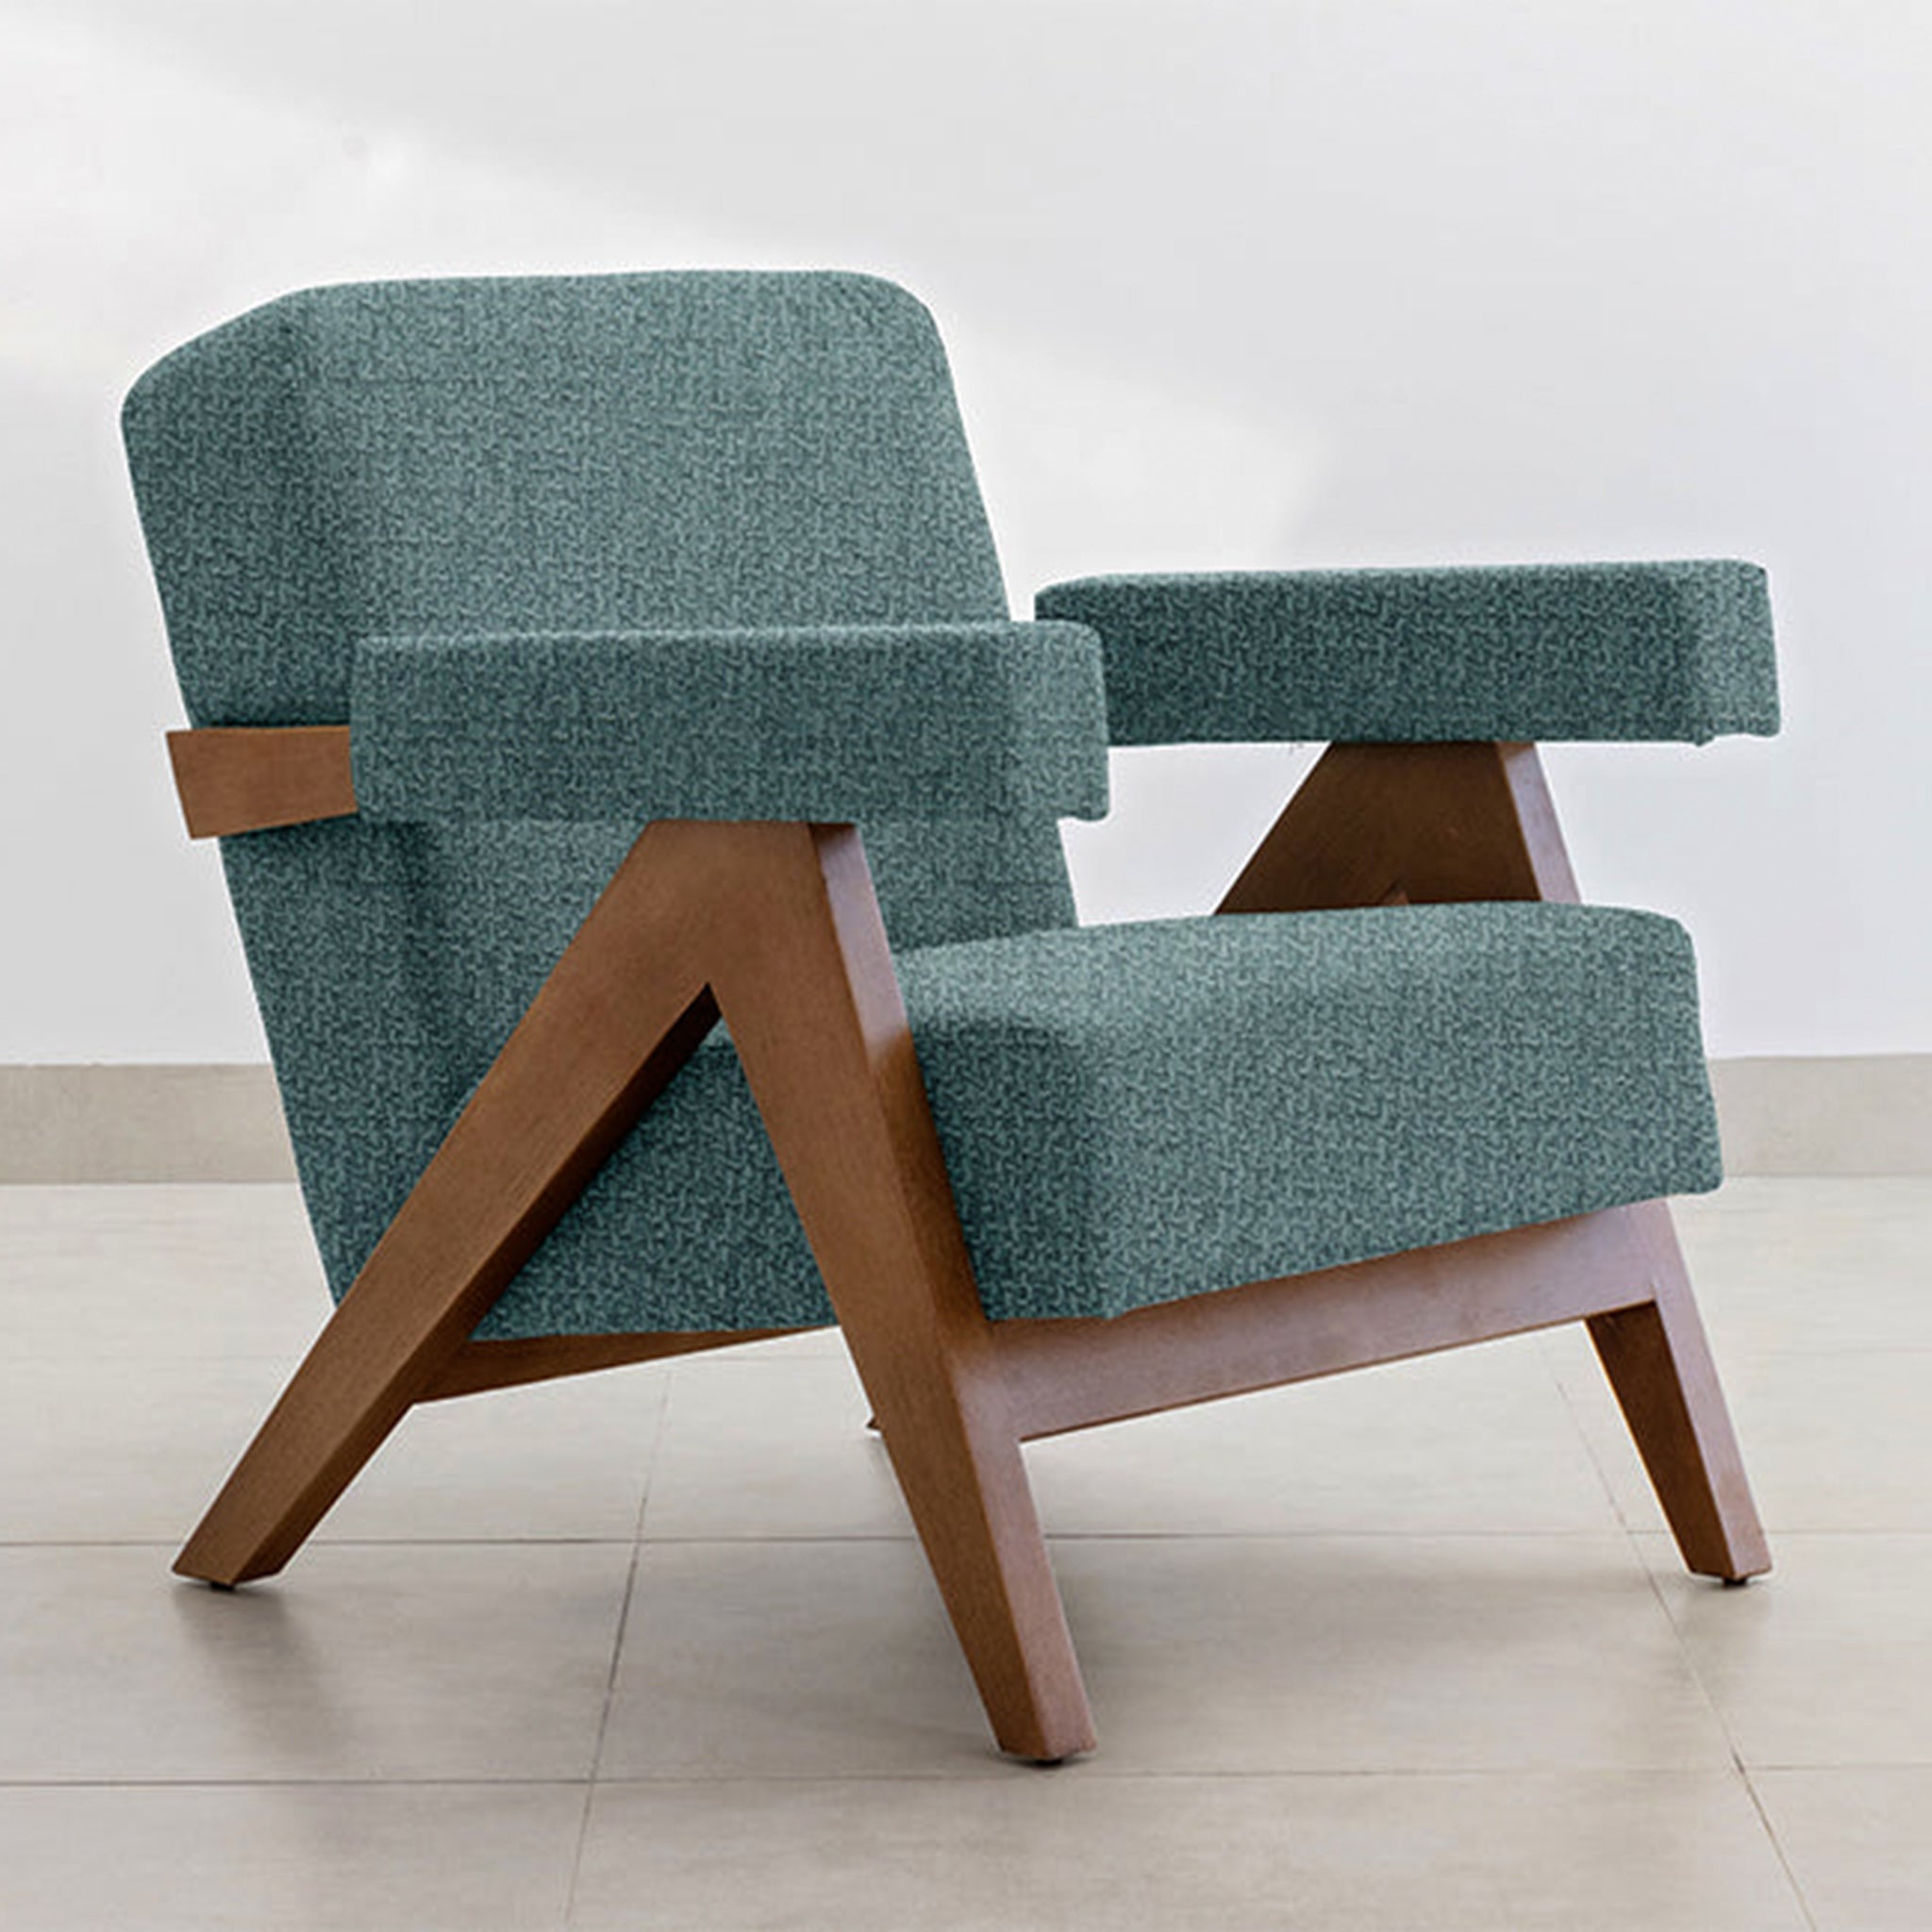 Sophisticated teal and wood Pierre Accent Chair for modern interiors